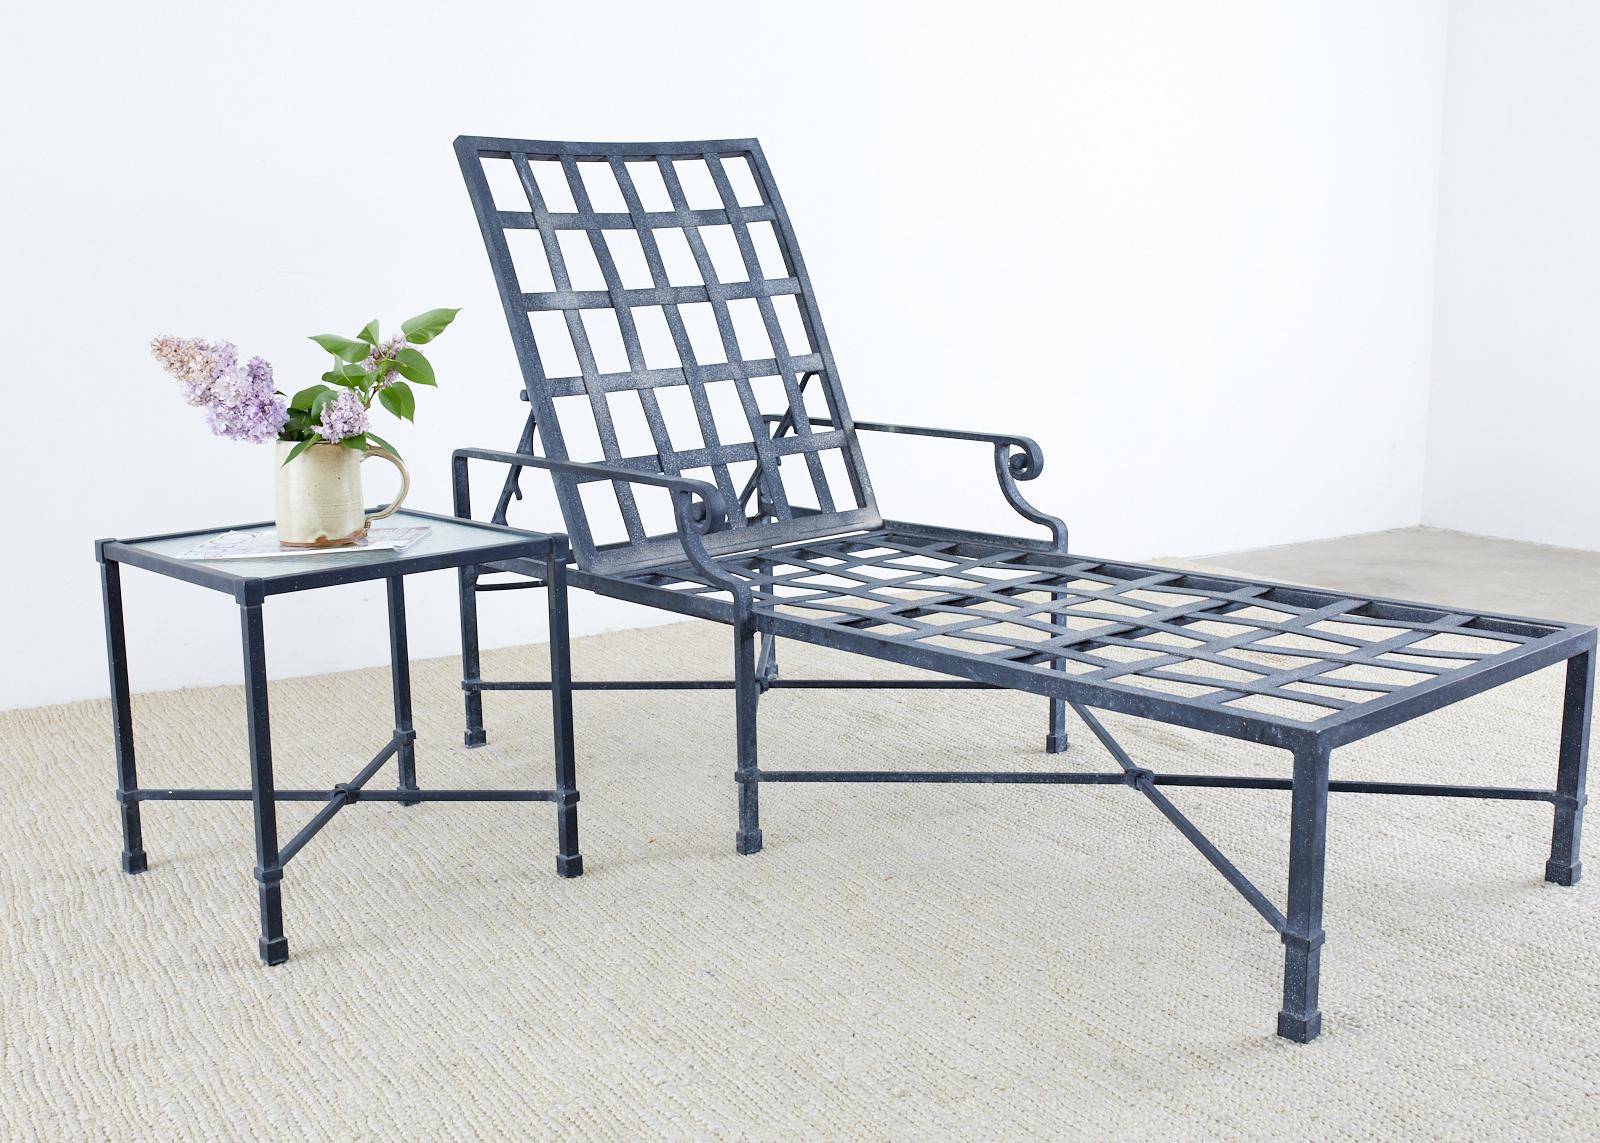 Stylish aluminum patio and garden chaise lounges made by Brown Jordan. From the Venetian collection featuring a lattice seat and adjustable back with decorative scrolled arms. The lounges have a powder coated multi step finish with metallic flecks.